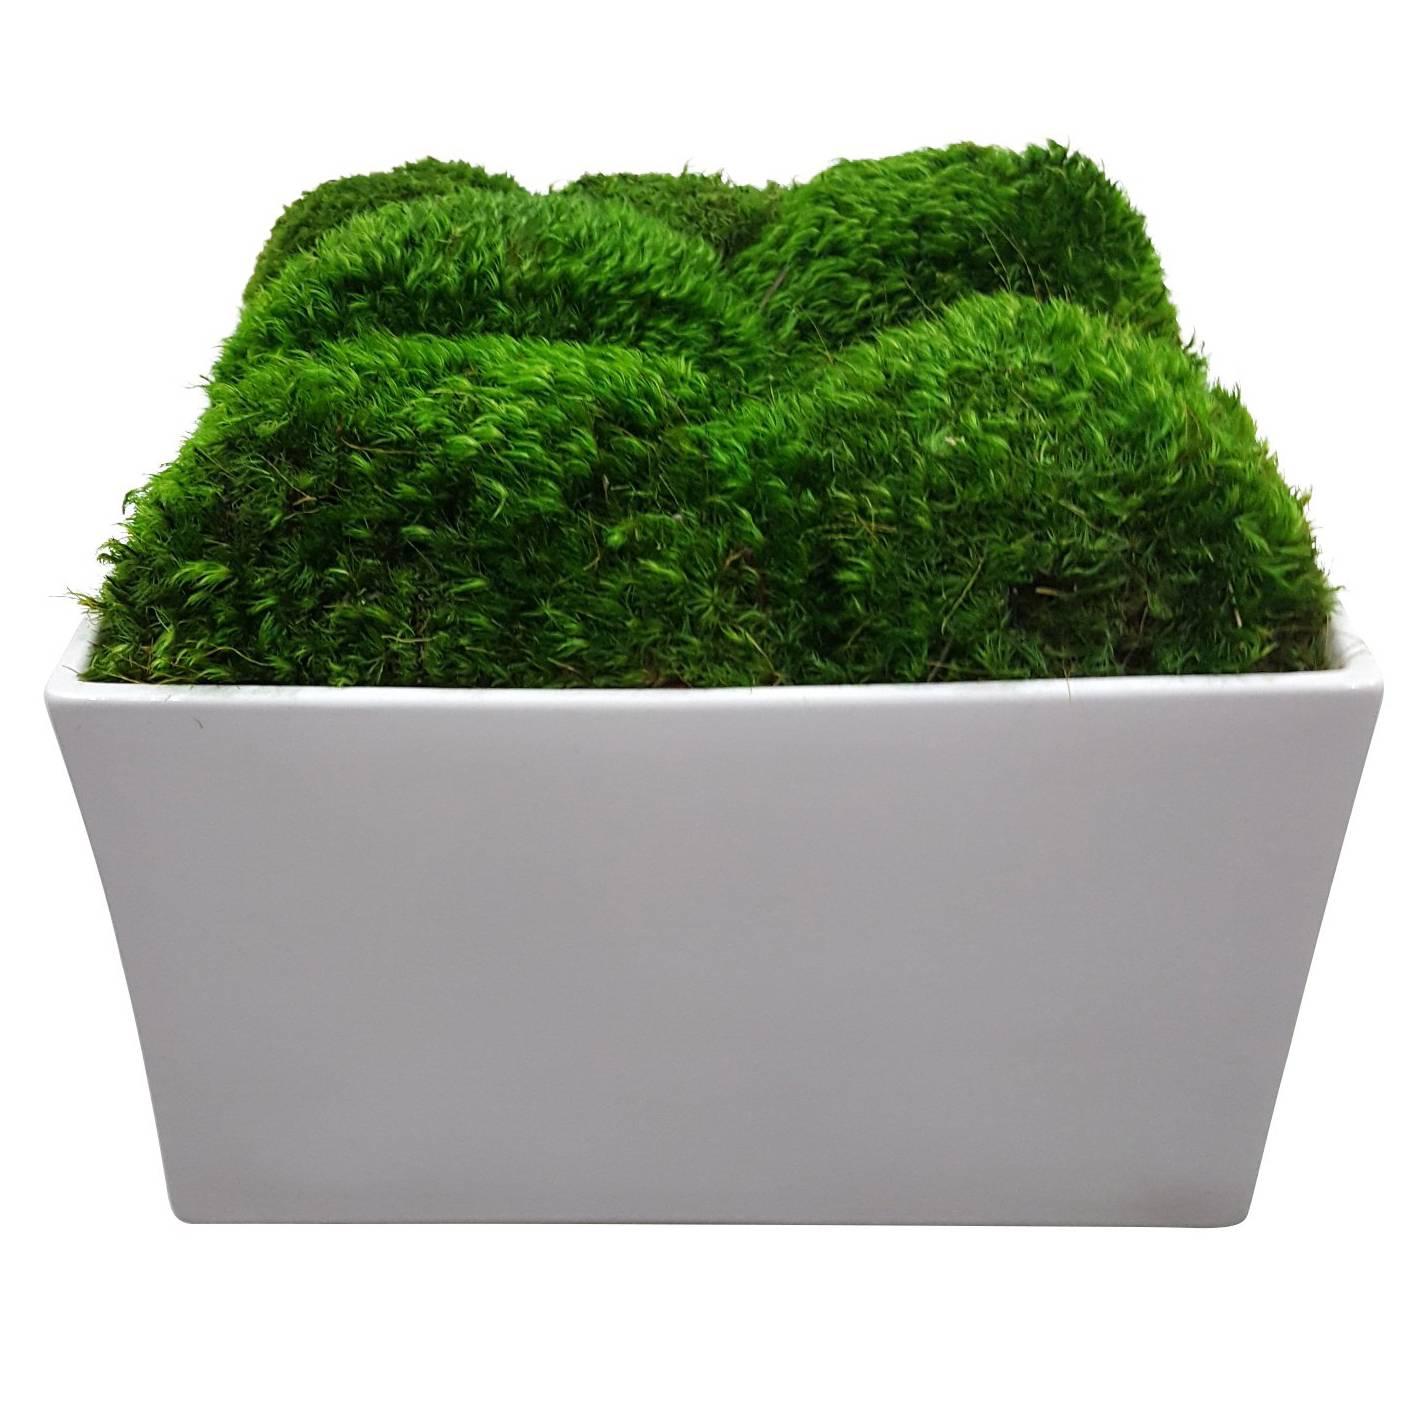 Botanical in Glossy White Square Planter For Sale